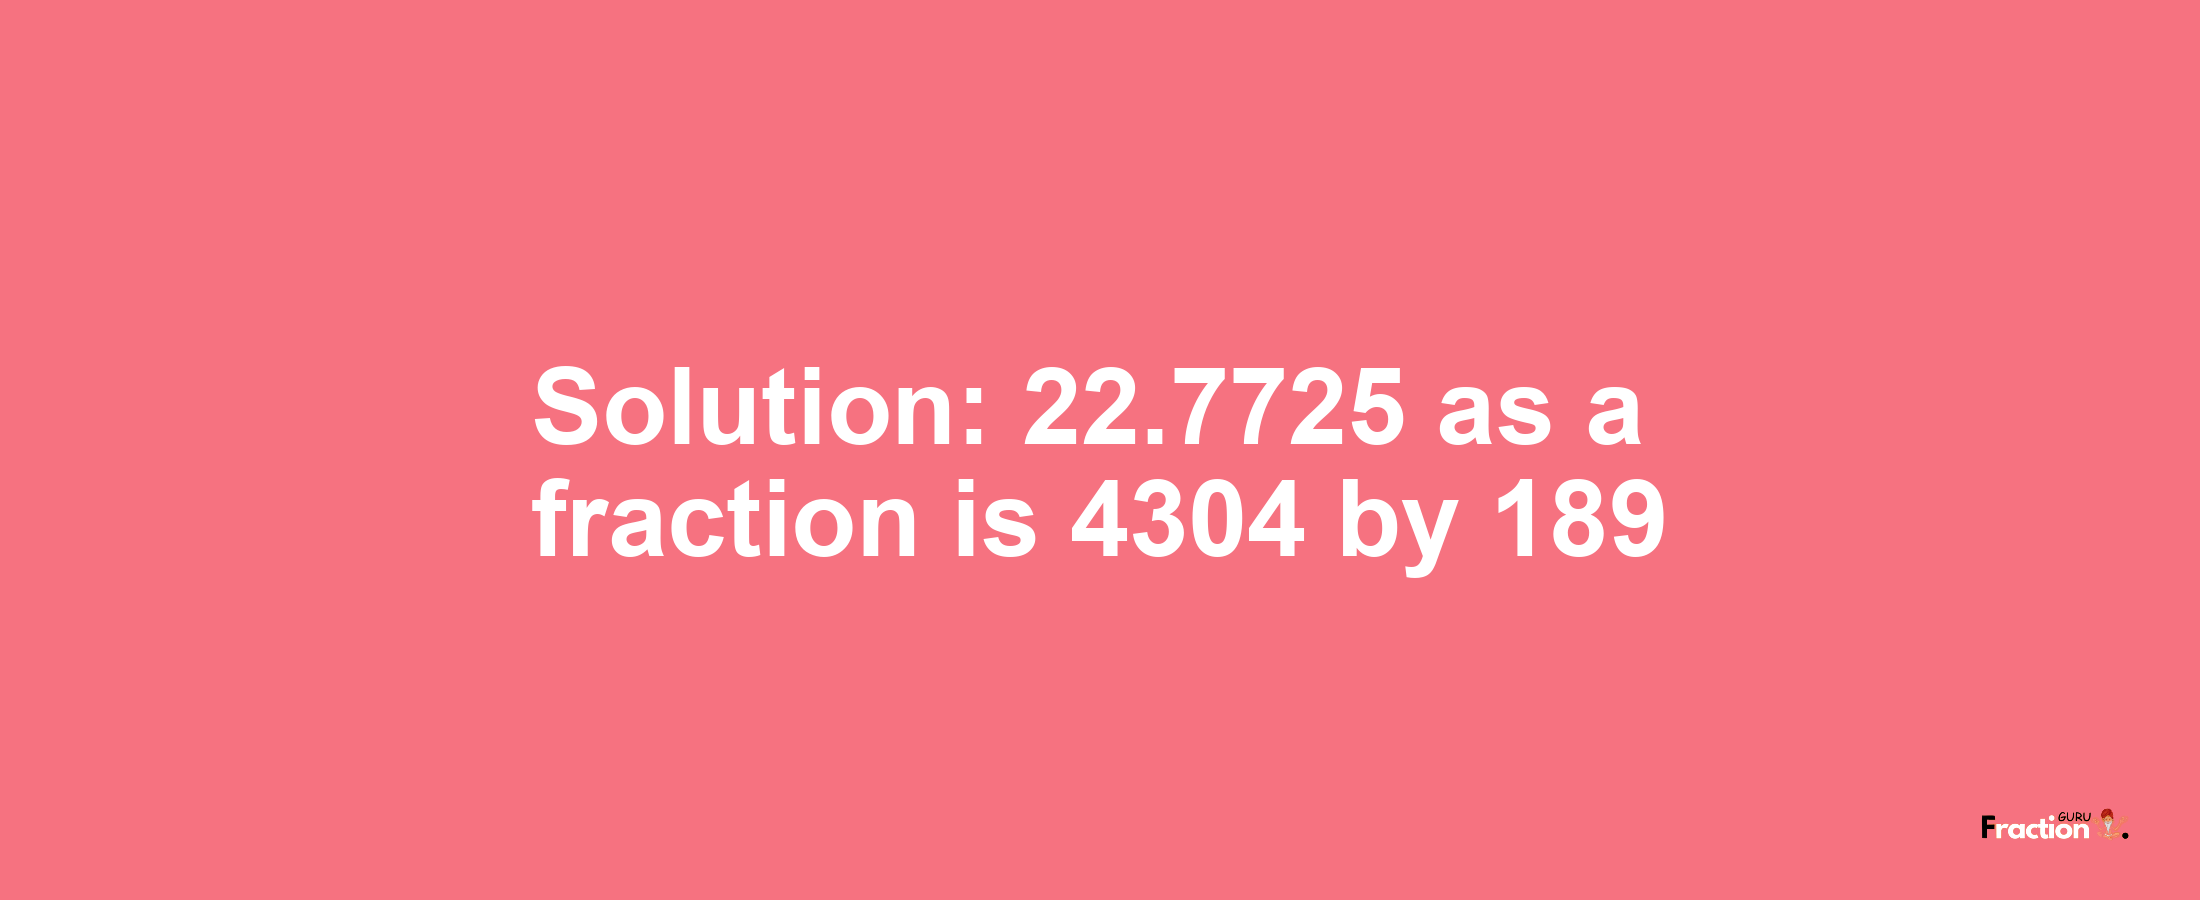 Solution:22.7725 as a fraction is 4304/189